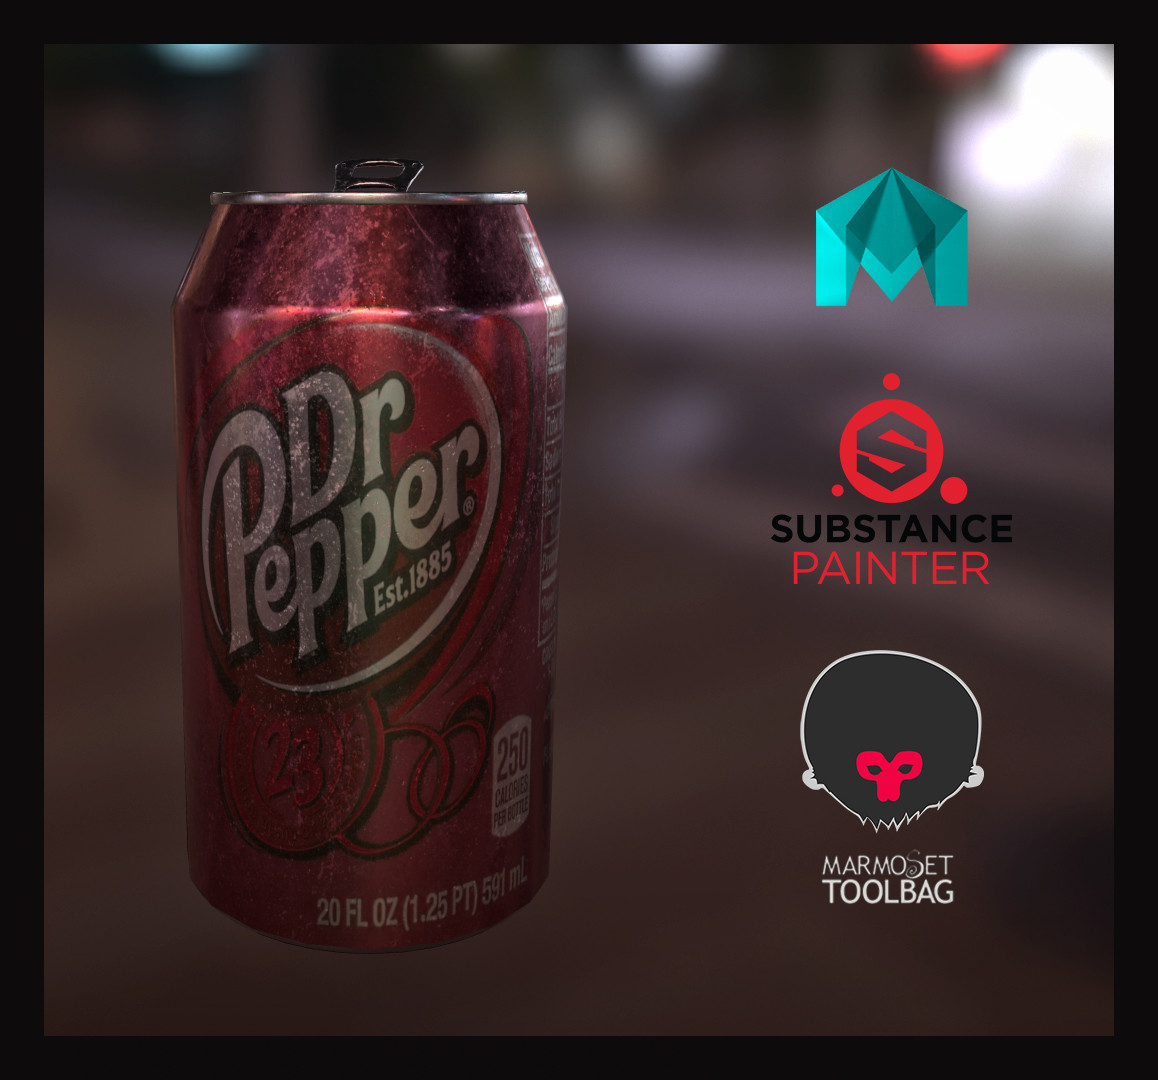 Dr pepper drink of intellectuals